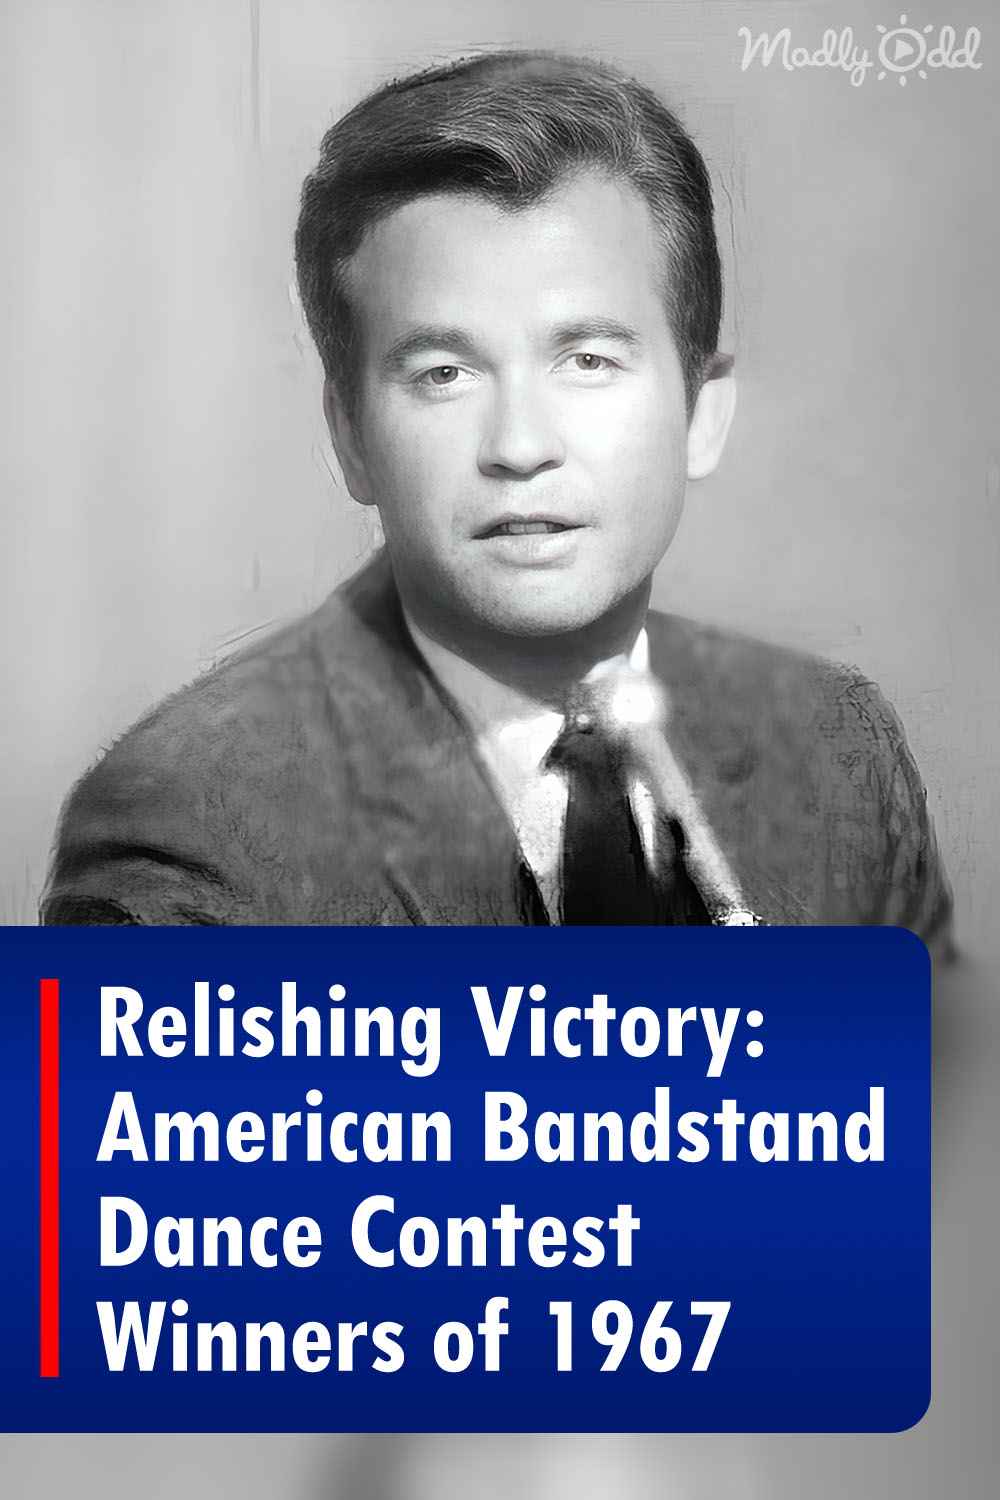 Relishing Victory: American Bandstand Dance Contest Winners of 1967